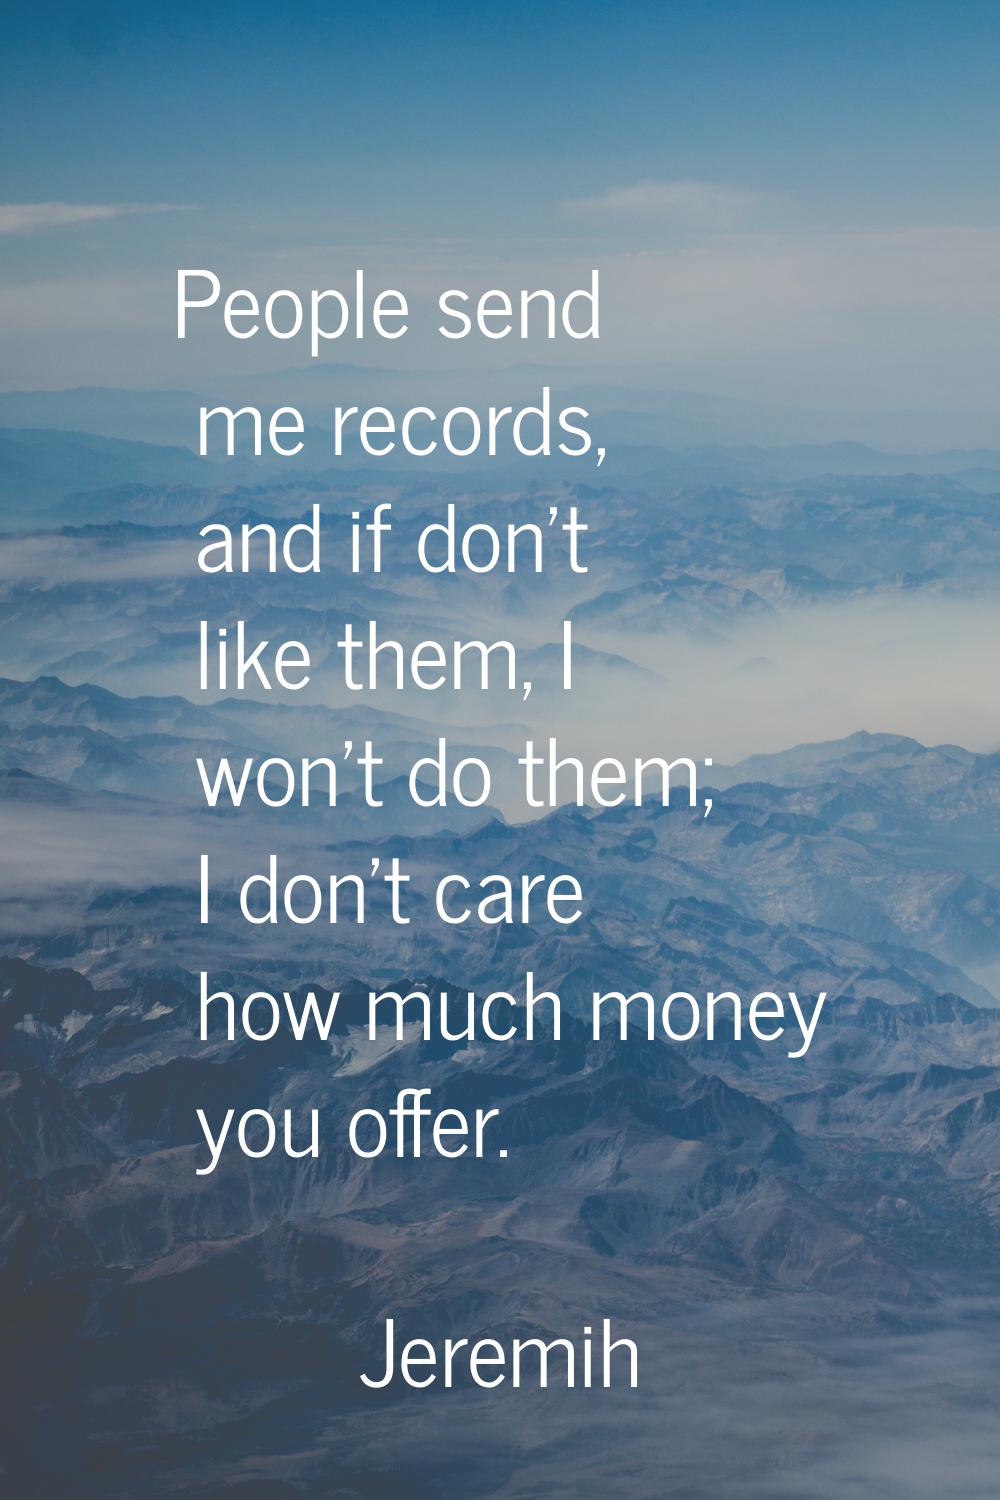 People send me records, and if don't like them, I won't do them; I don't care how much money you of